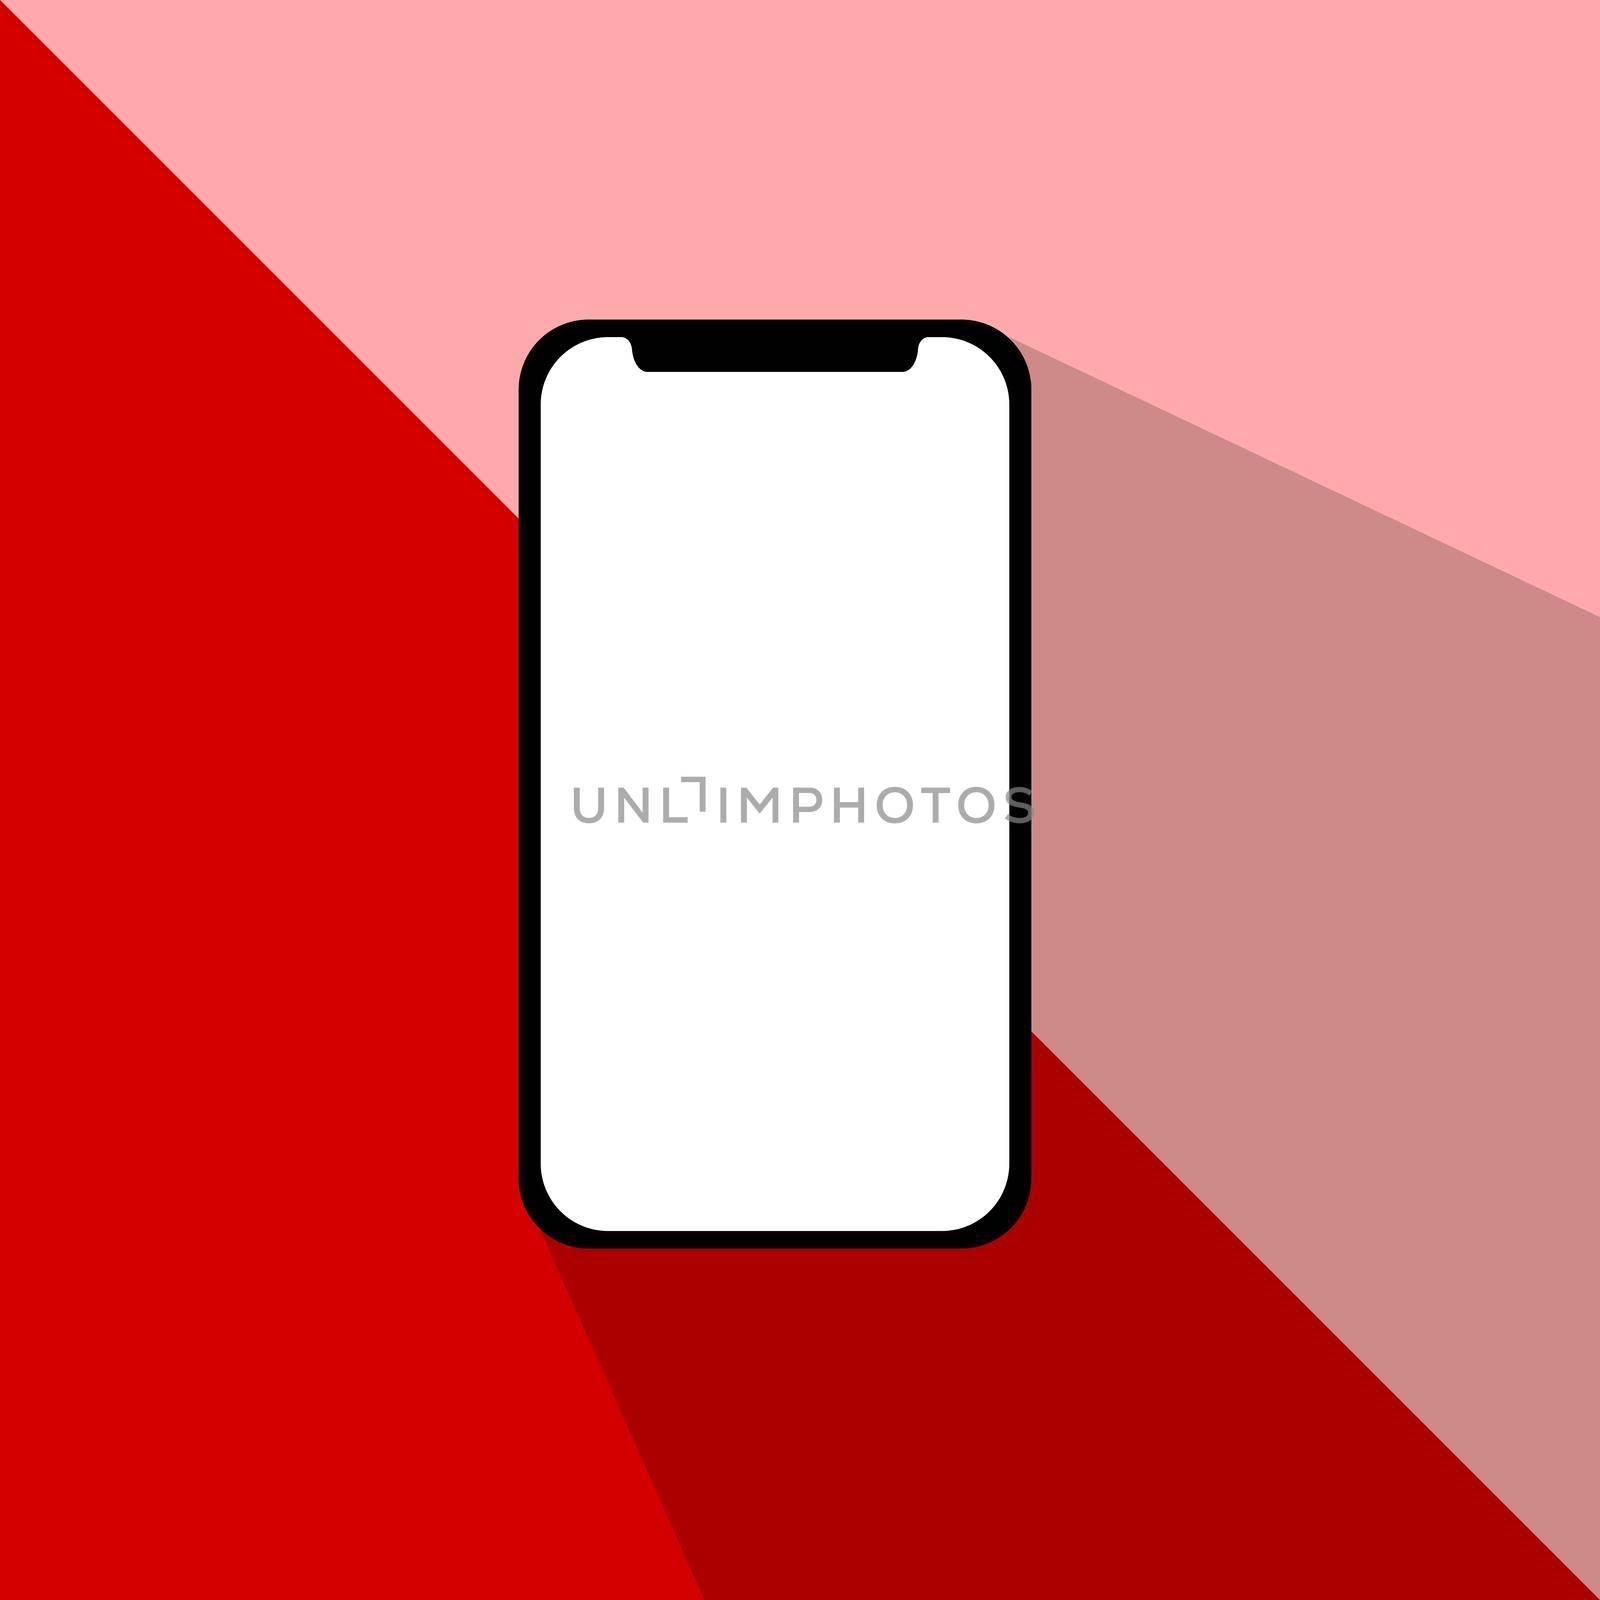 Smart phone square icon. Flat design style. Mobile phone simple silhouette. Modern, minimalist, round icon in stylish colors. Web site page and mobile app design vector element. Elegant by mrceviz